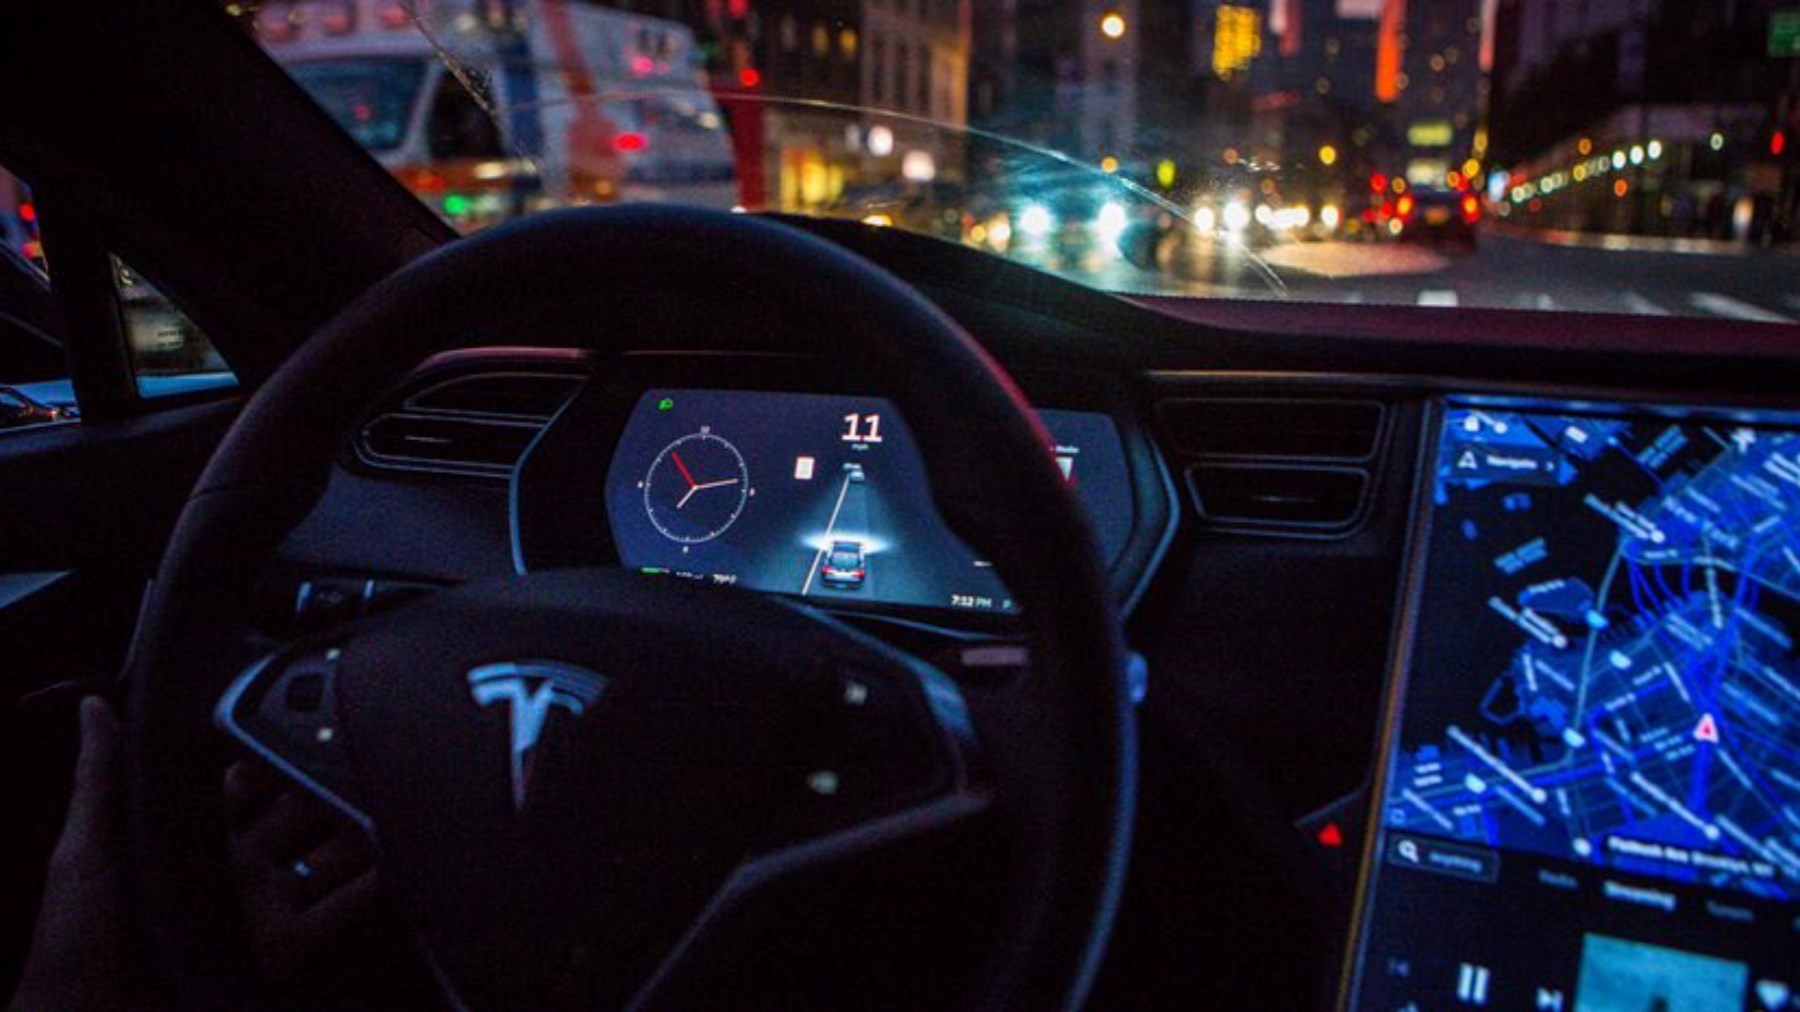 Explained and tested: Tesla's 'self-driving' Autopilot